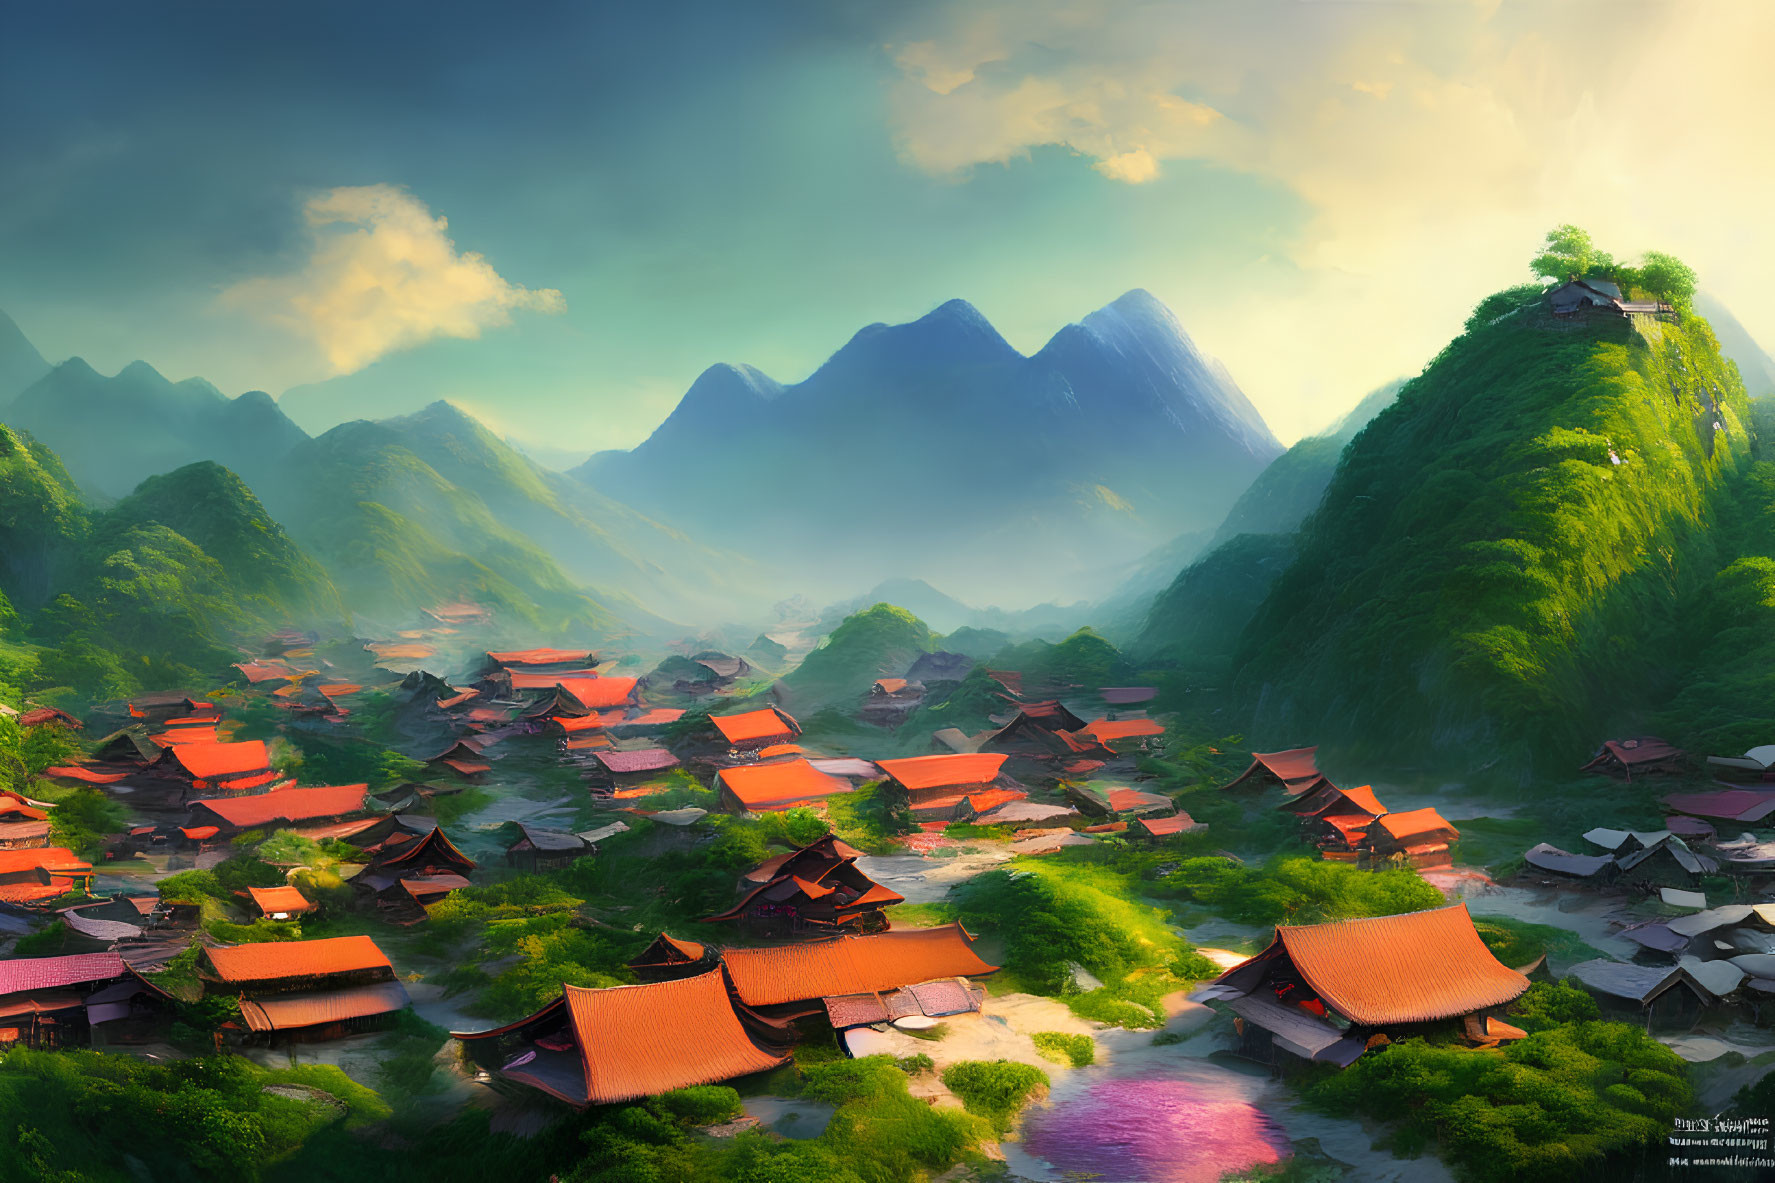 Scenic village in lush valley with red-roofed houses